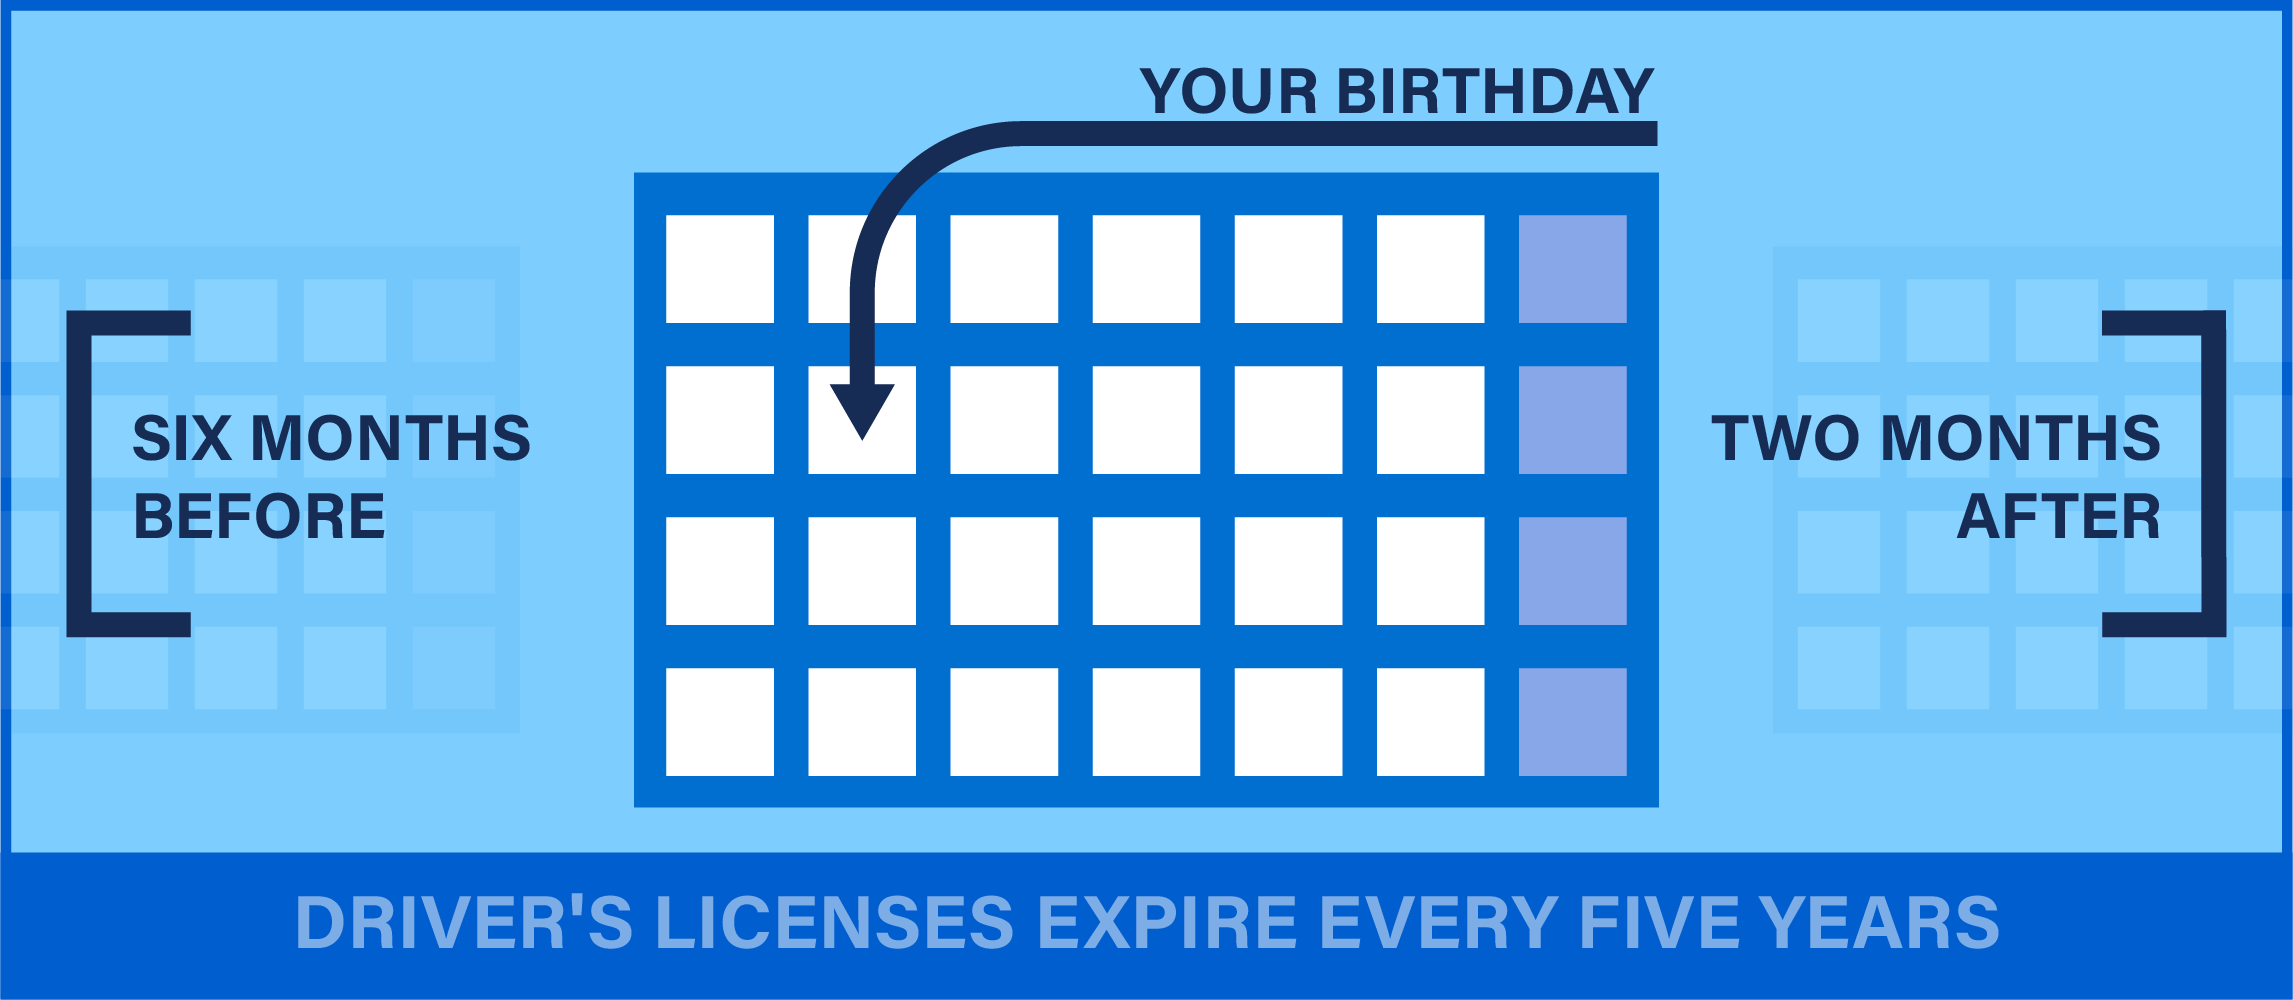 can you renew your driver's license before your birthday